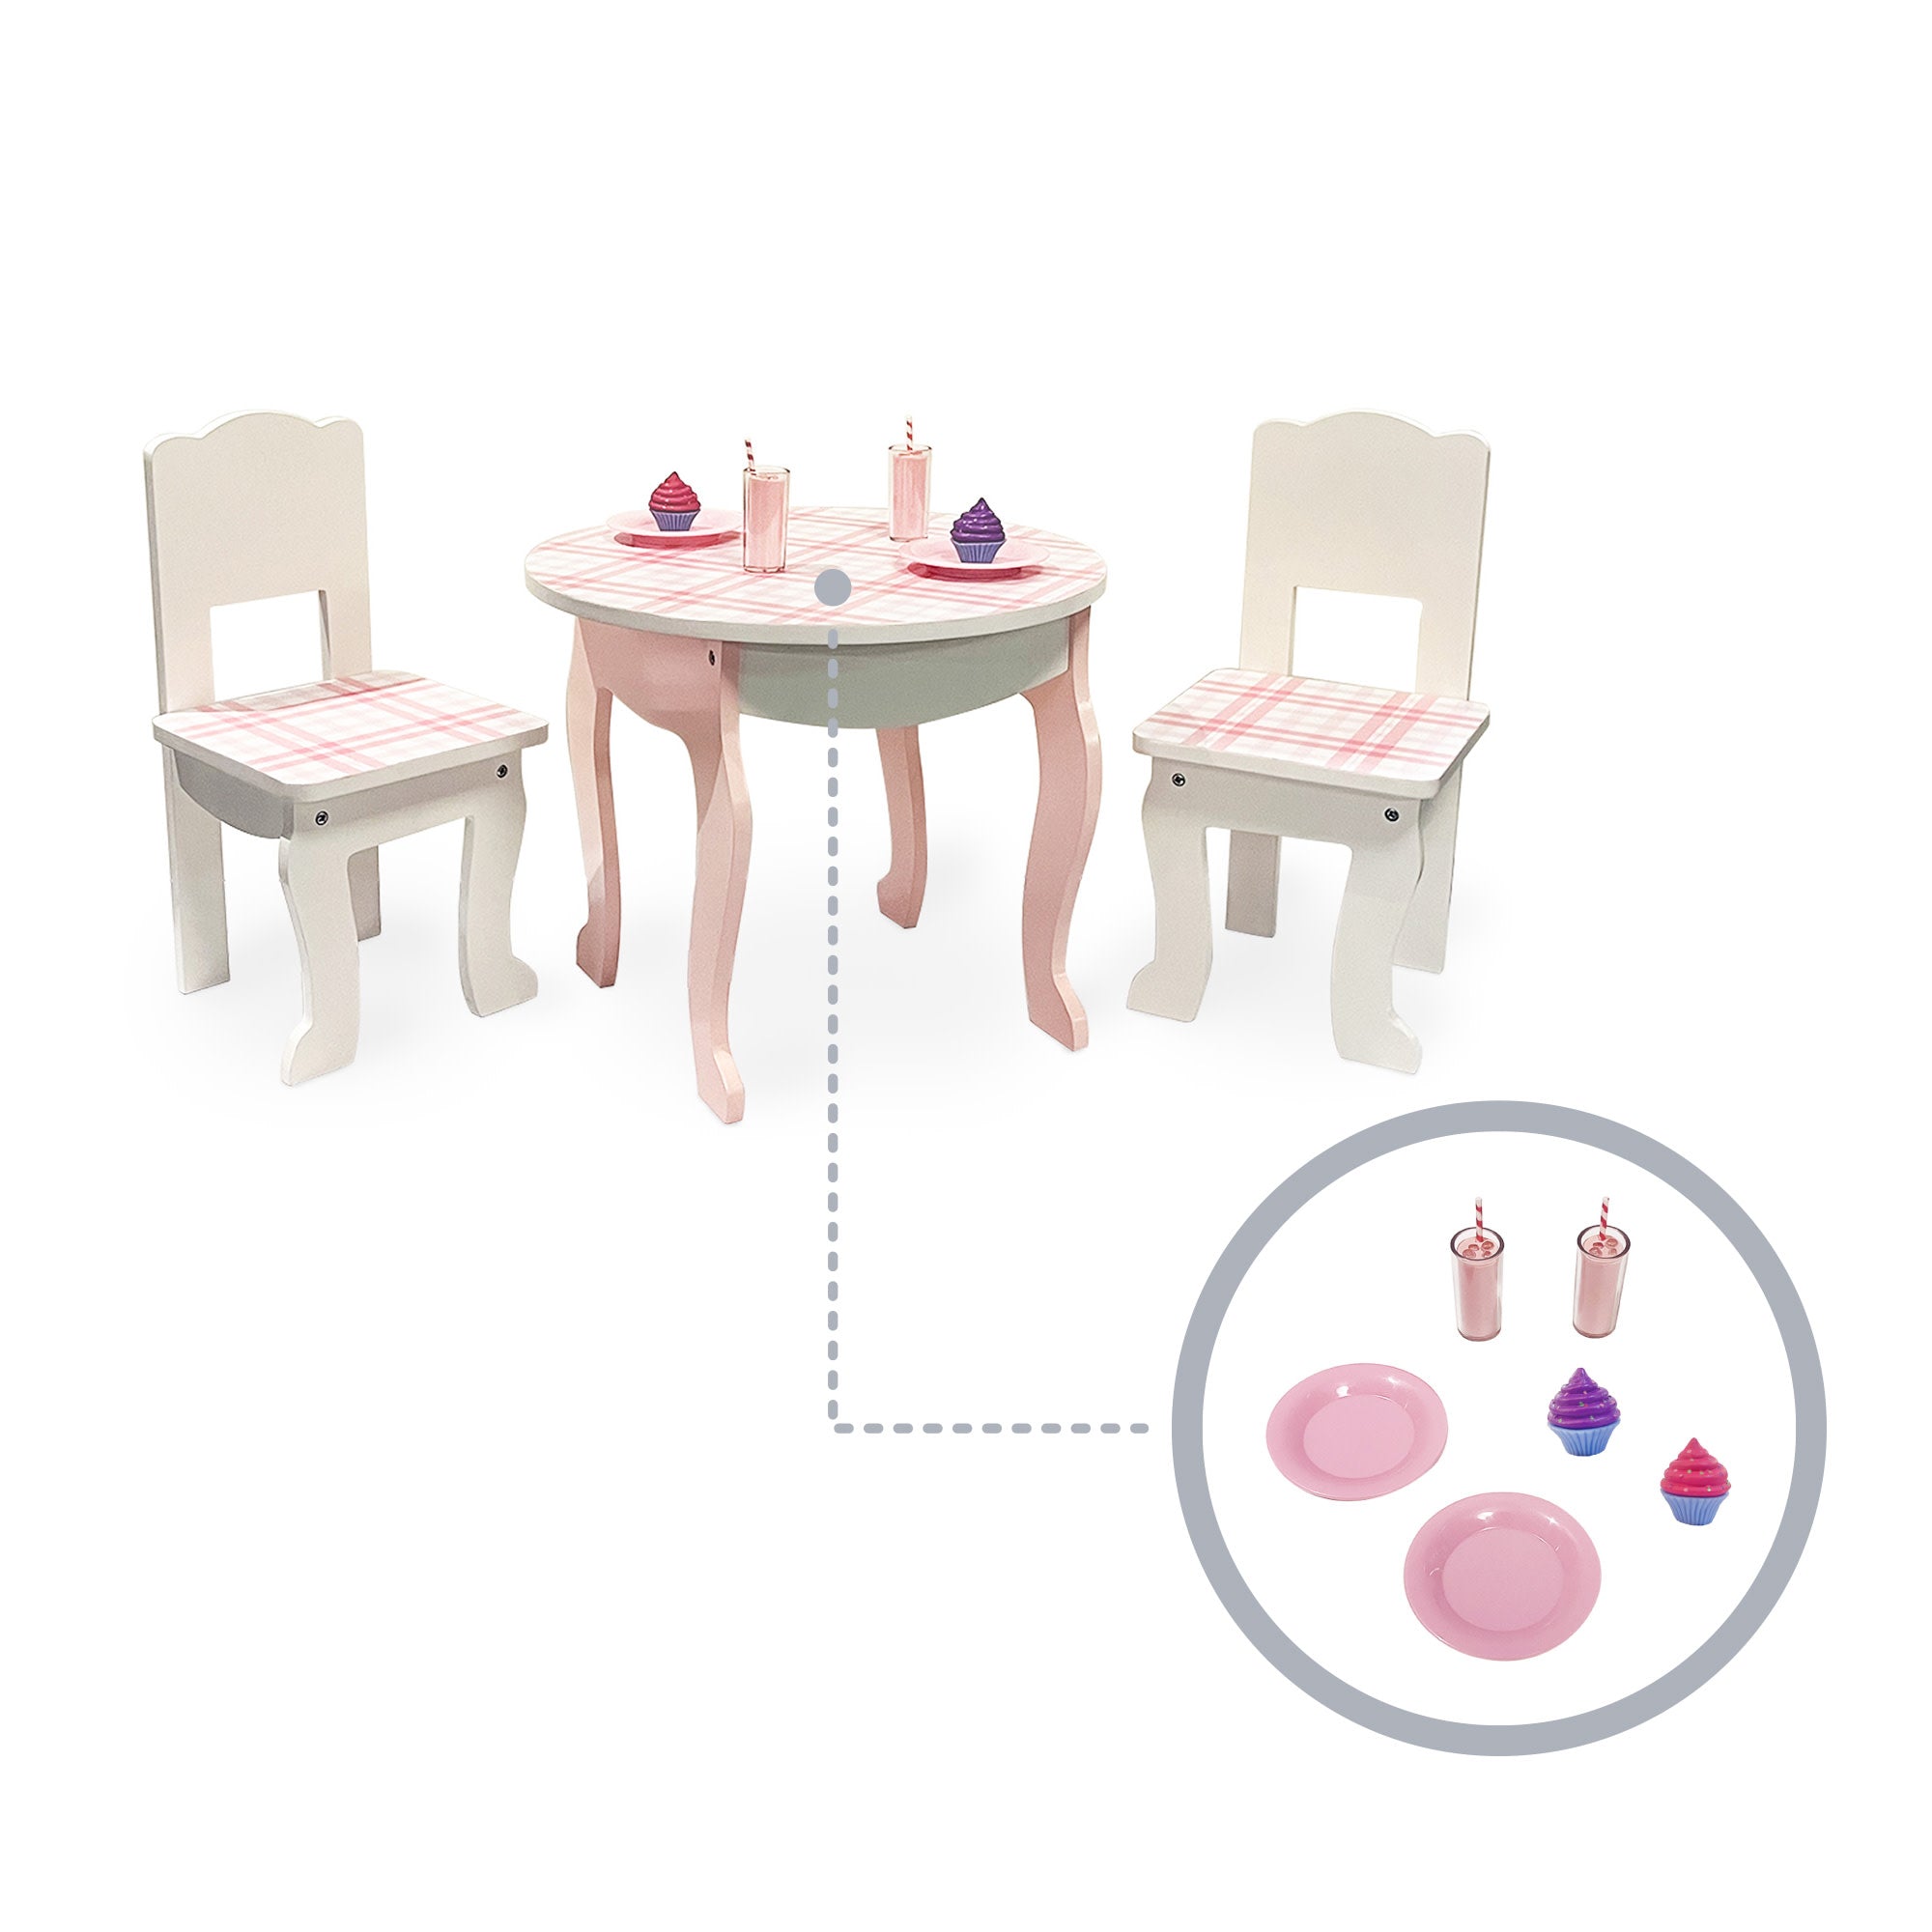 Sophia's Aurora Princess Decorative Table & Chairs Set with Desserts and Accessories for 18" Dolls, Pink